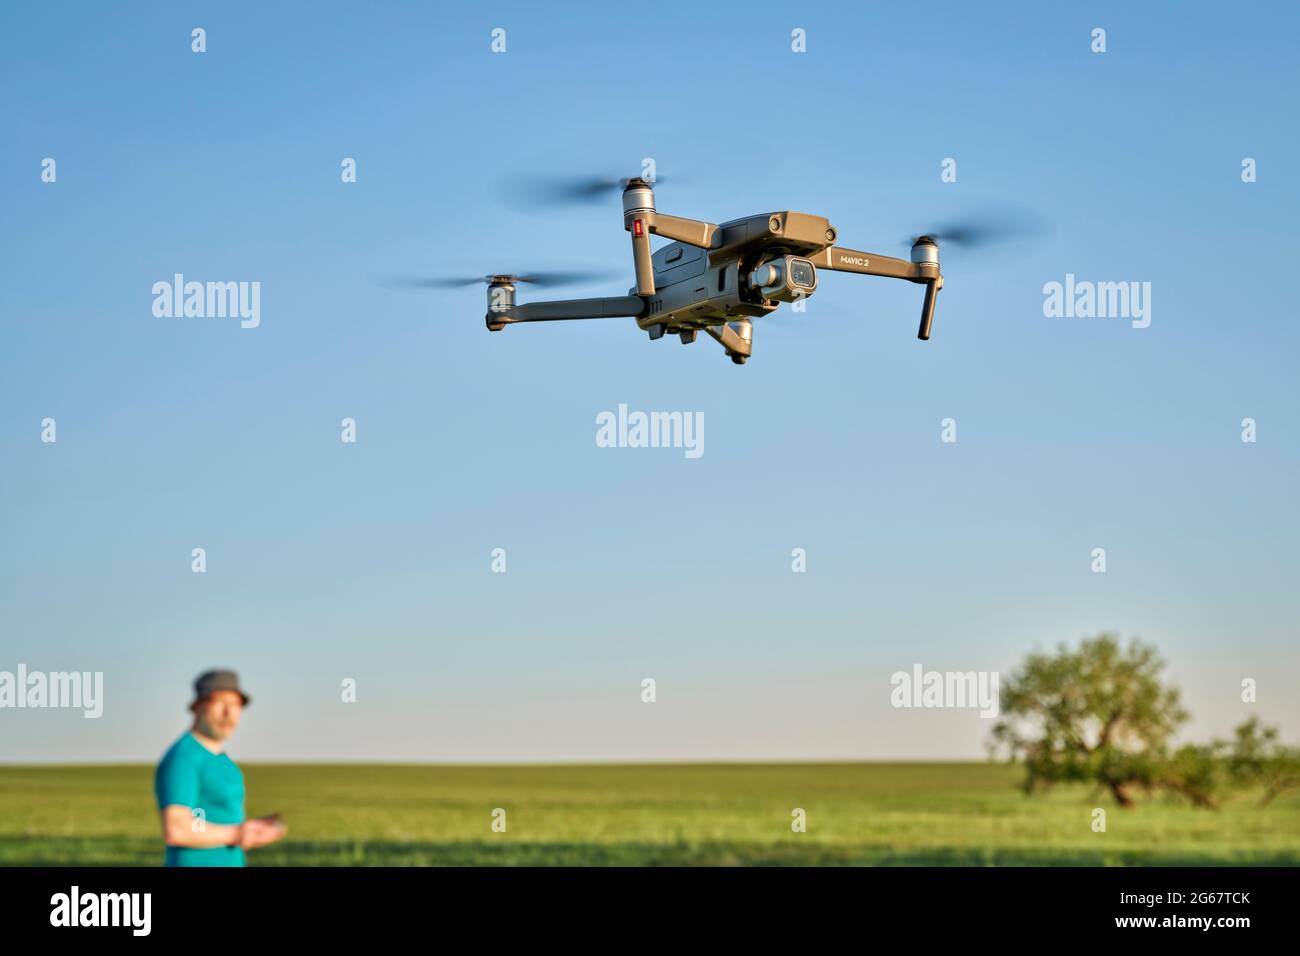 Briggsdale, CO, USA - June 8, 2021:  Radio controlled DJI Mavic 2 Pro quadcopter drone is flying over green prairie with a out of focus male pilot in Stock Photo